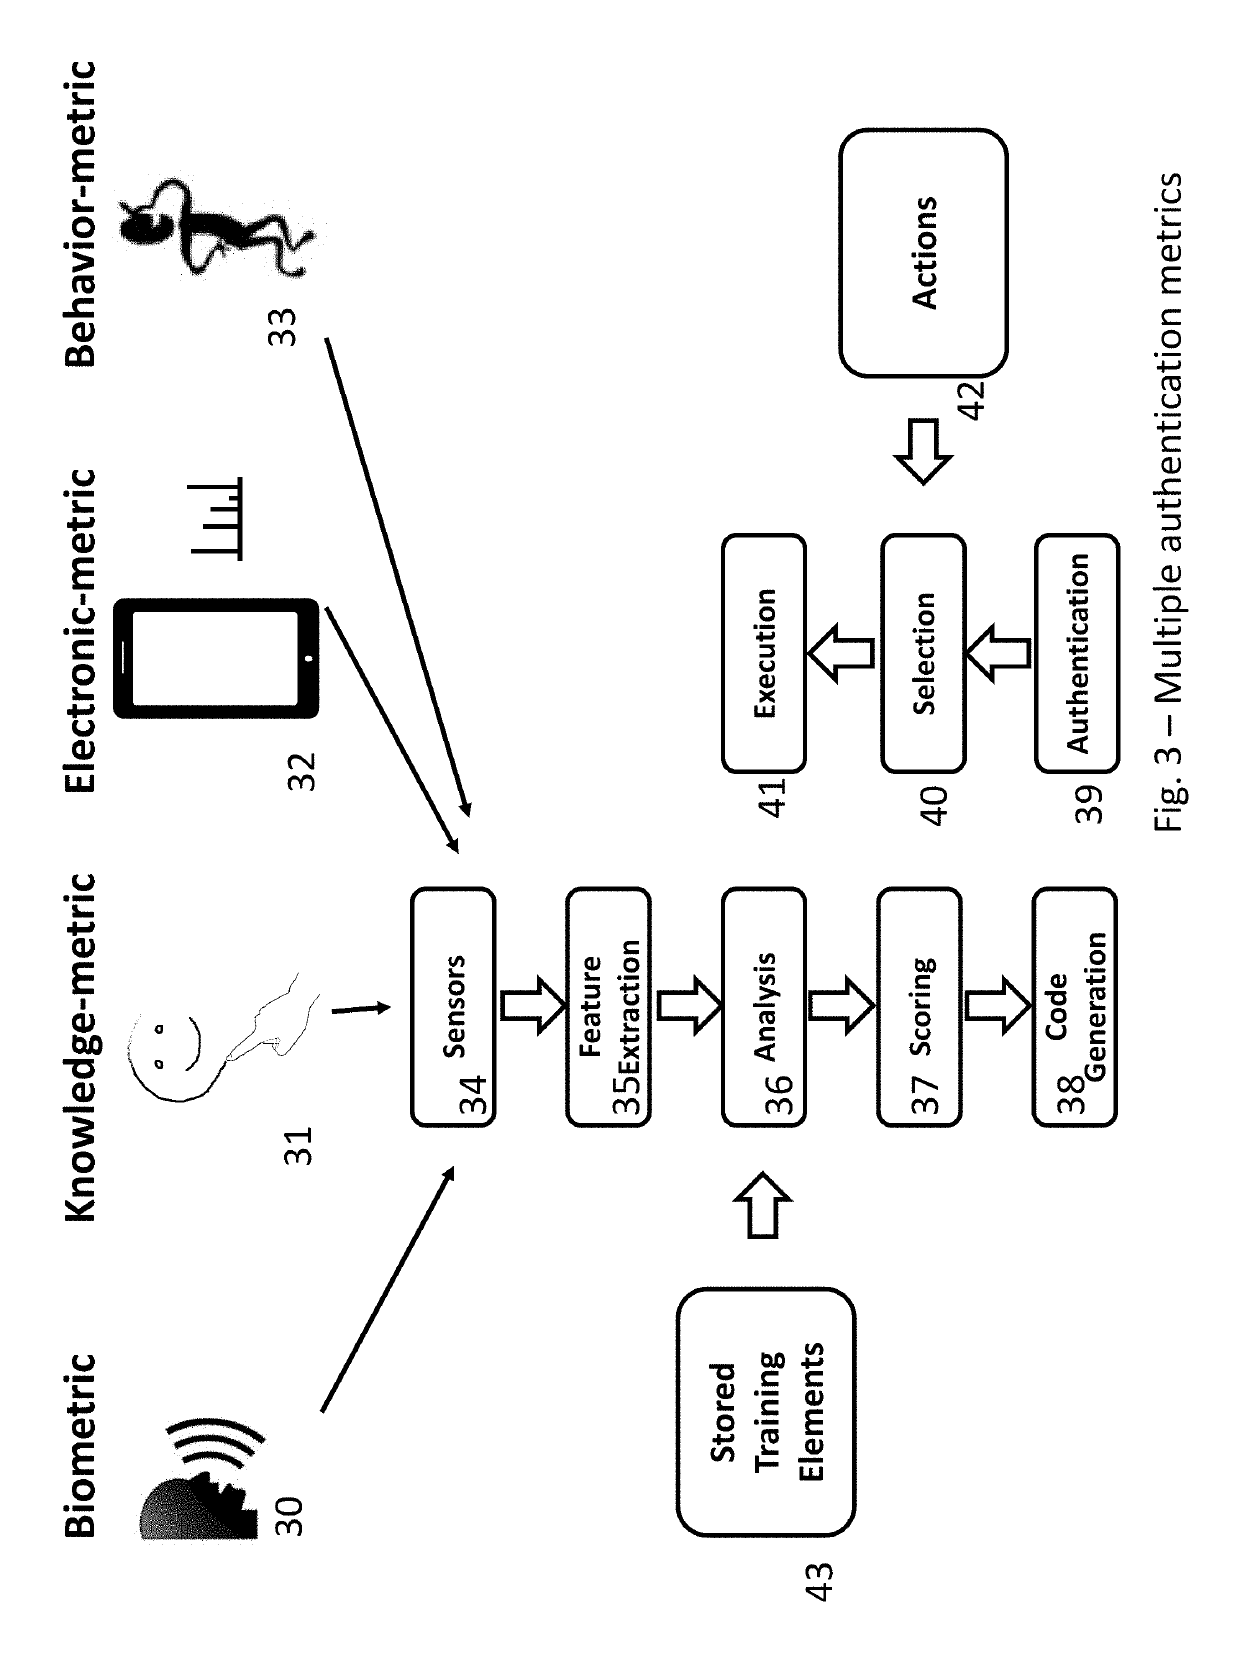 System and method to authenticate electronics using electronic-metrics